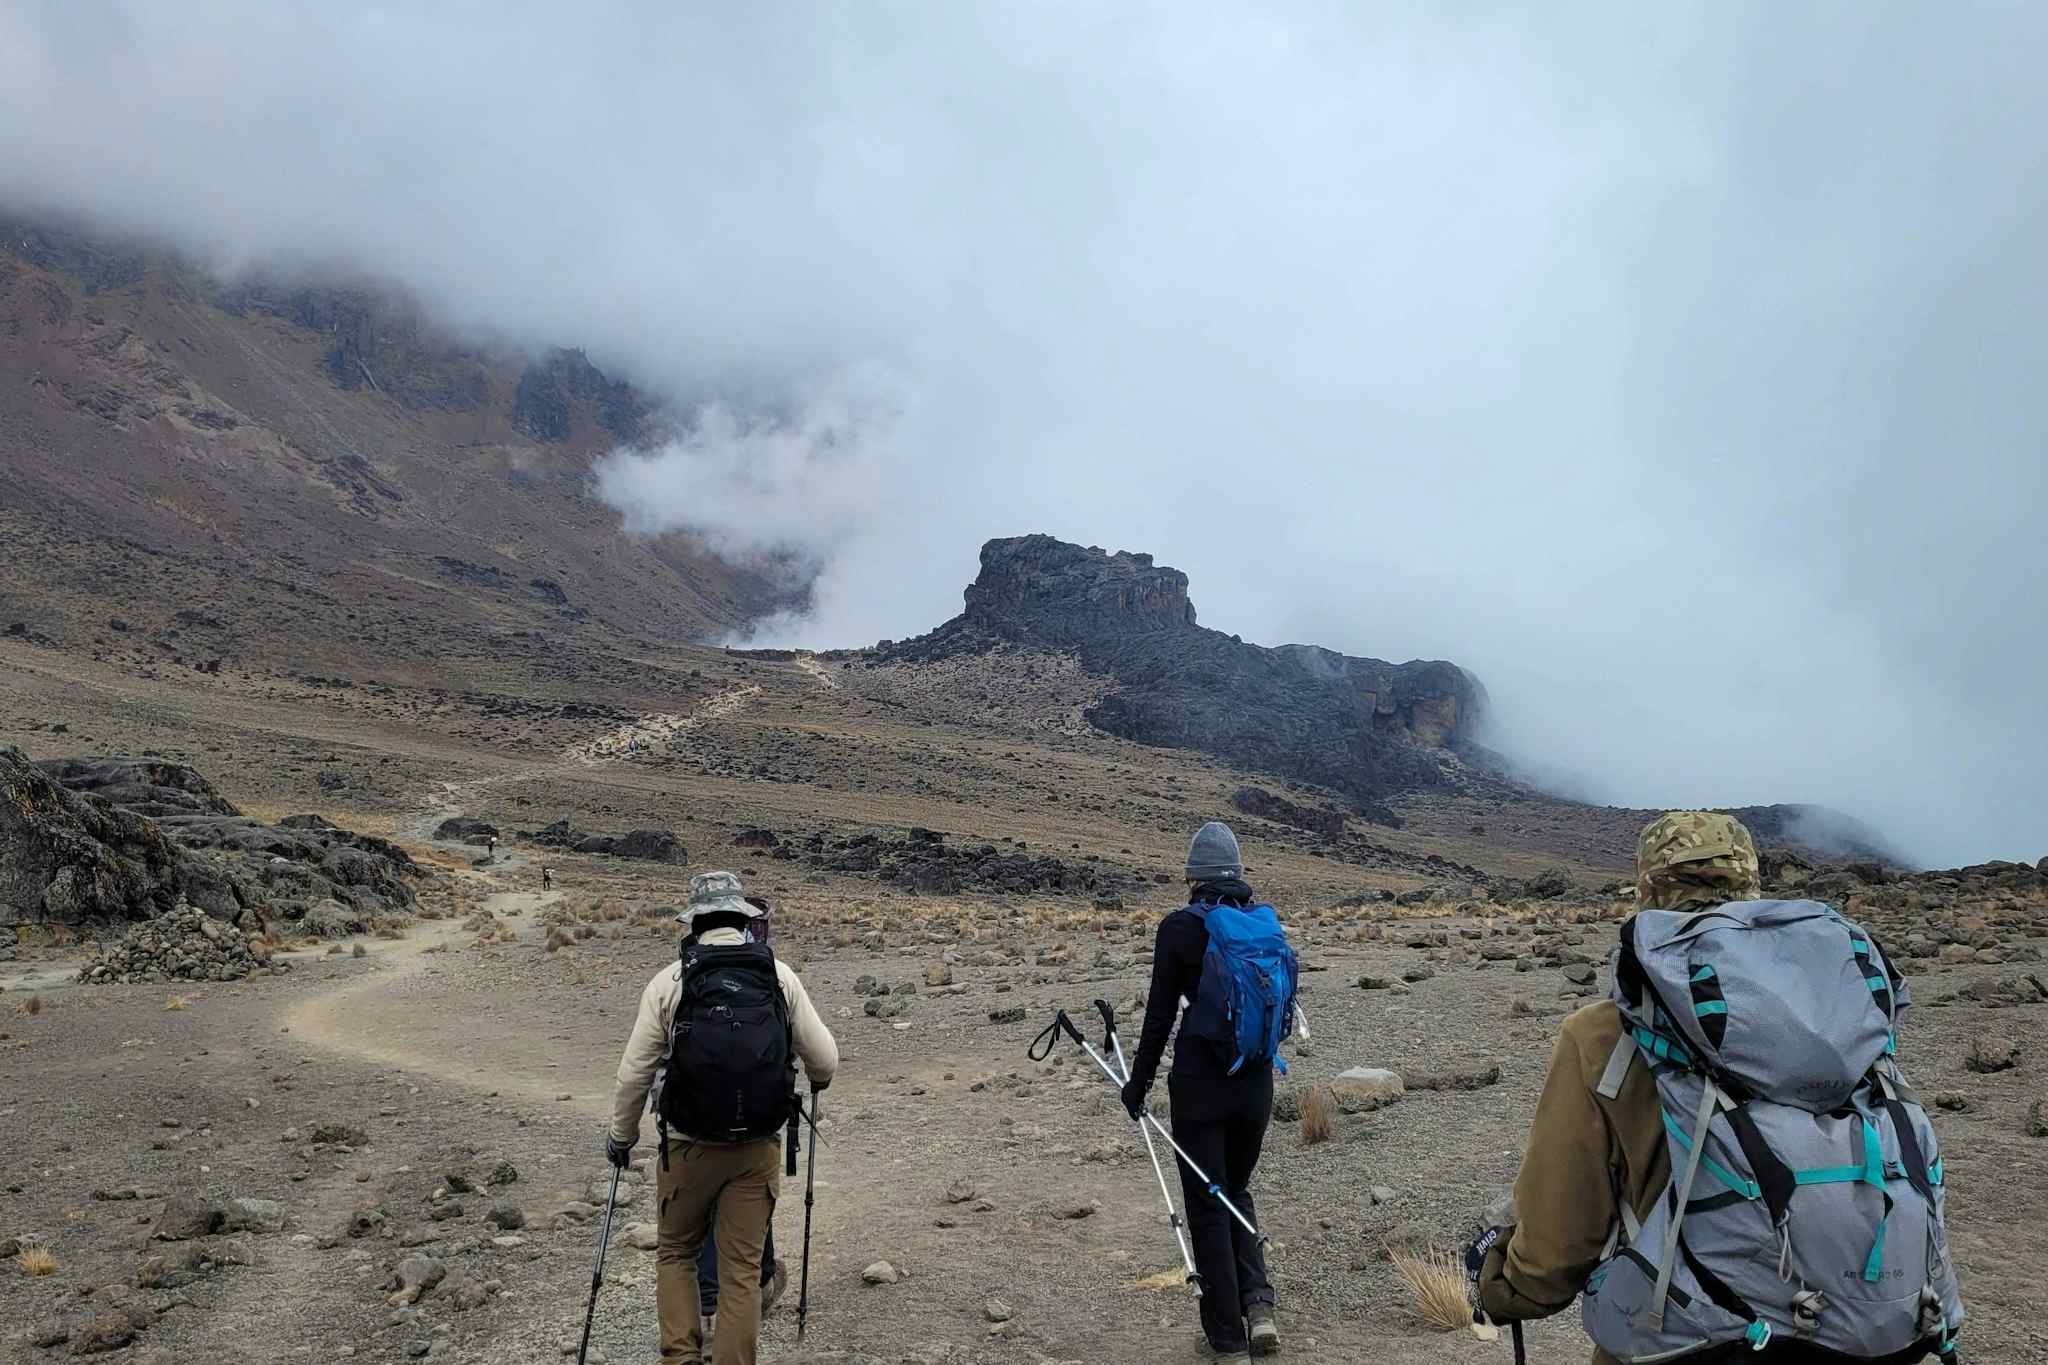 Lava Tower, Machame Route, Kilimanjaro. Photo Kirsty Holmes/Much Better Adventures